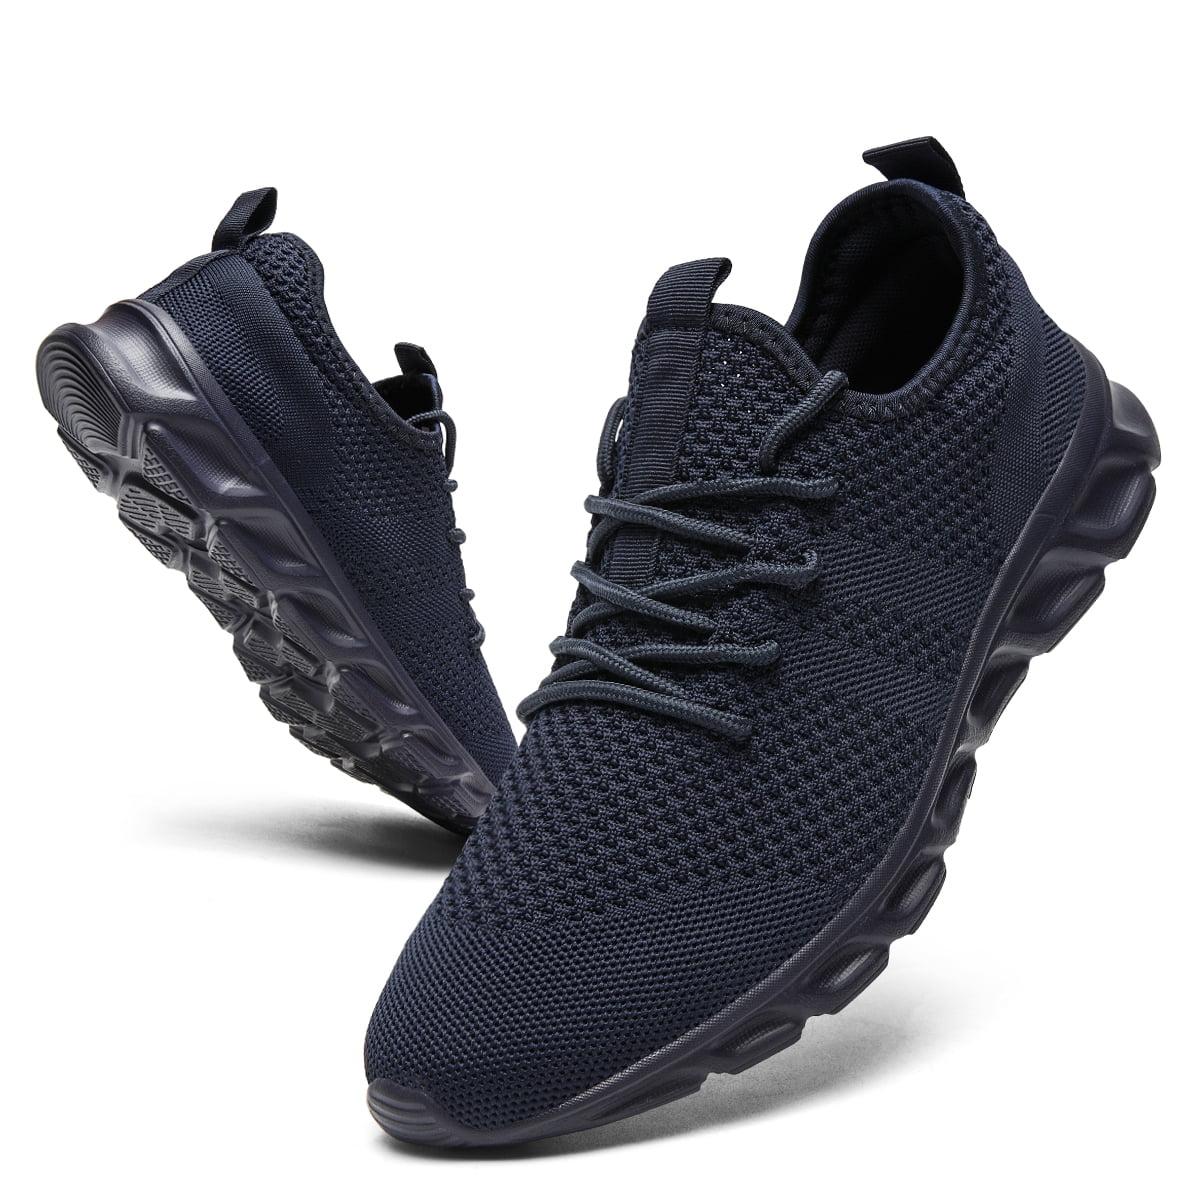 Men's Athletic Fashion Casual Sneakers Outdoor Running  Breathable Sports Shoes 